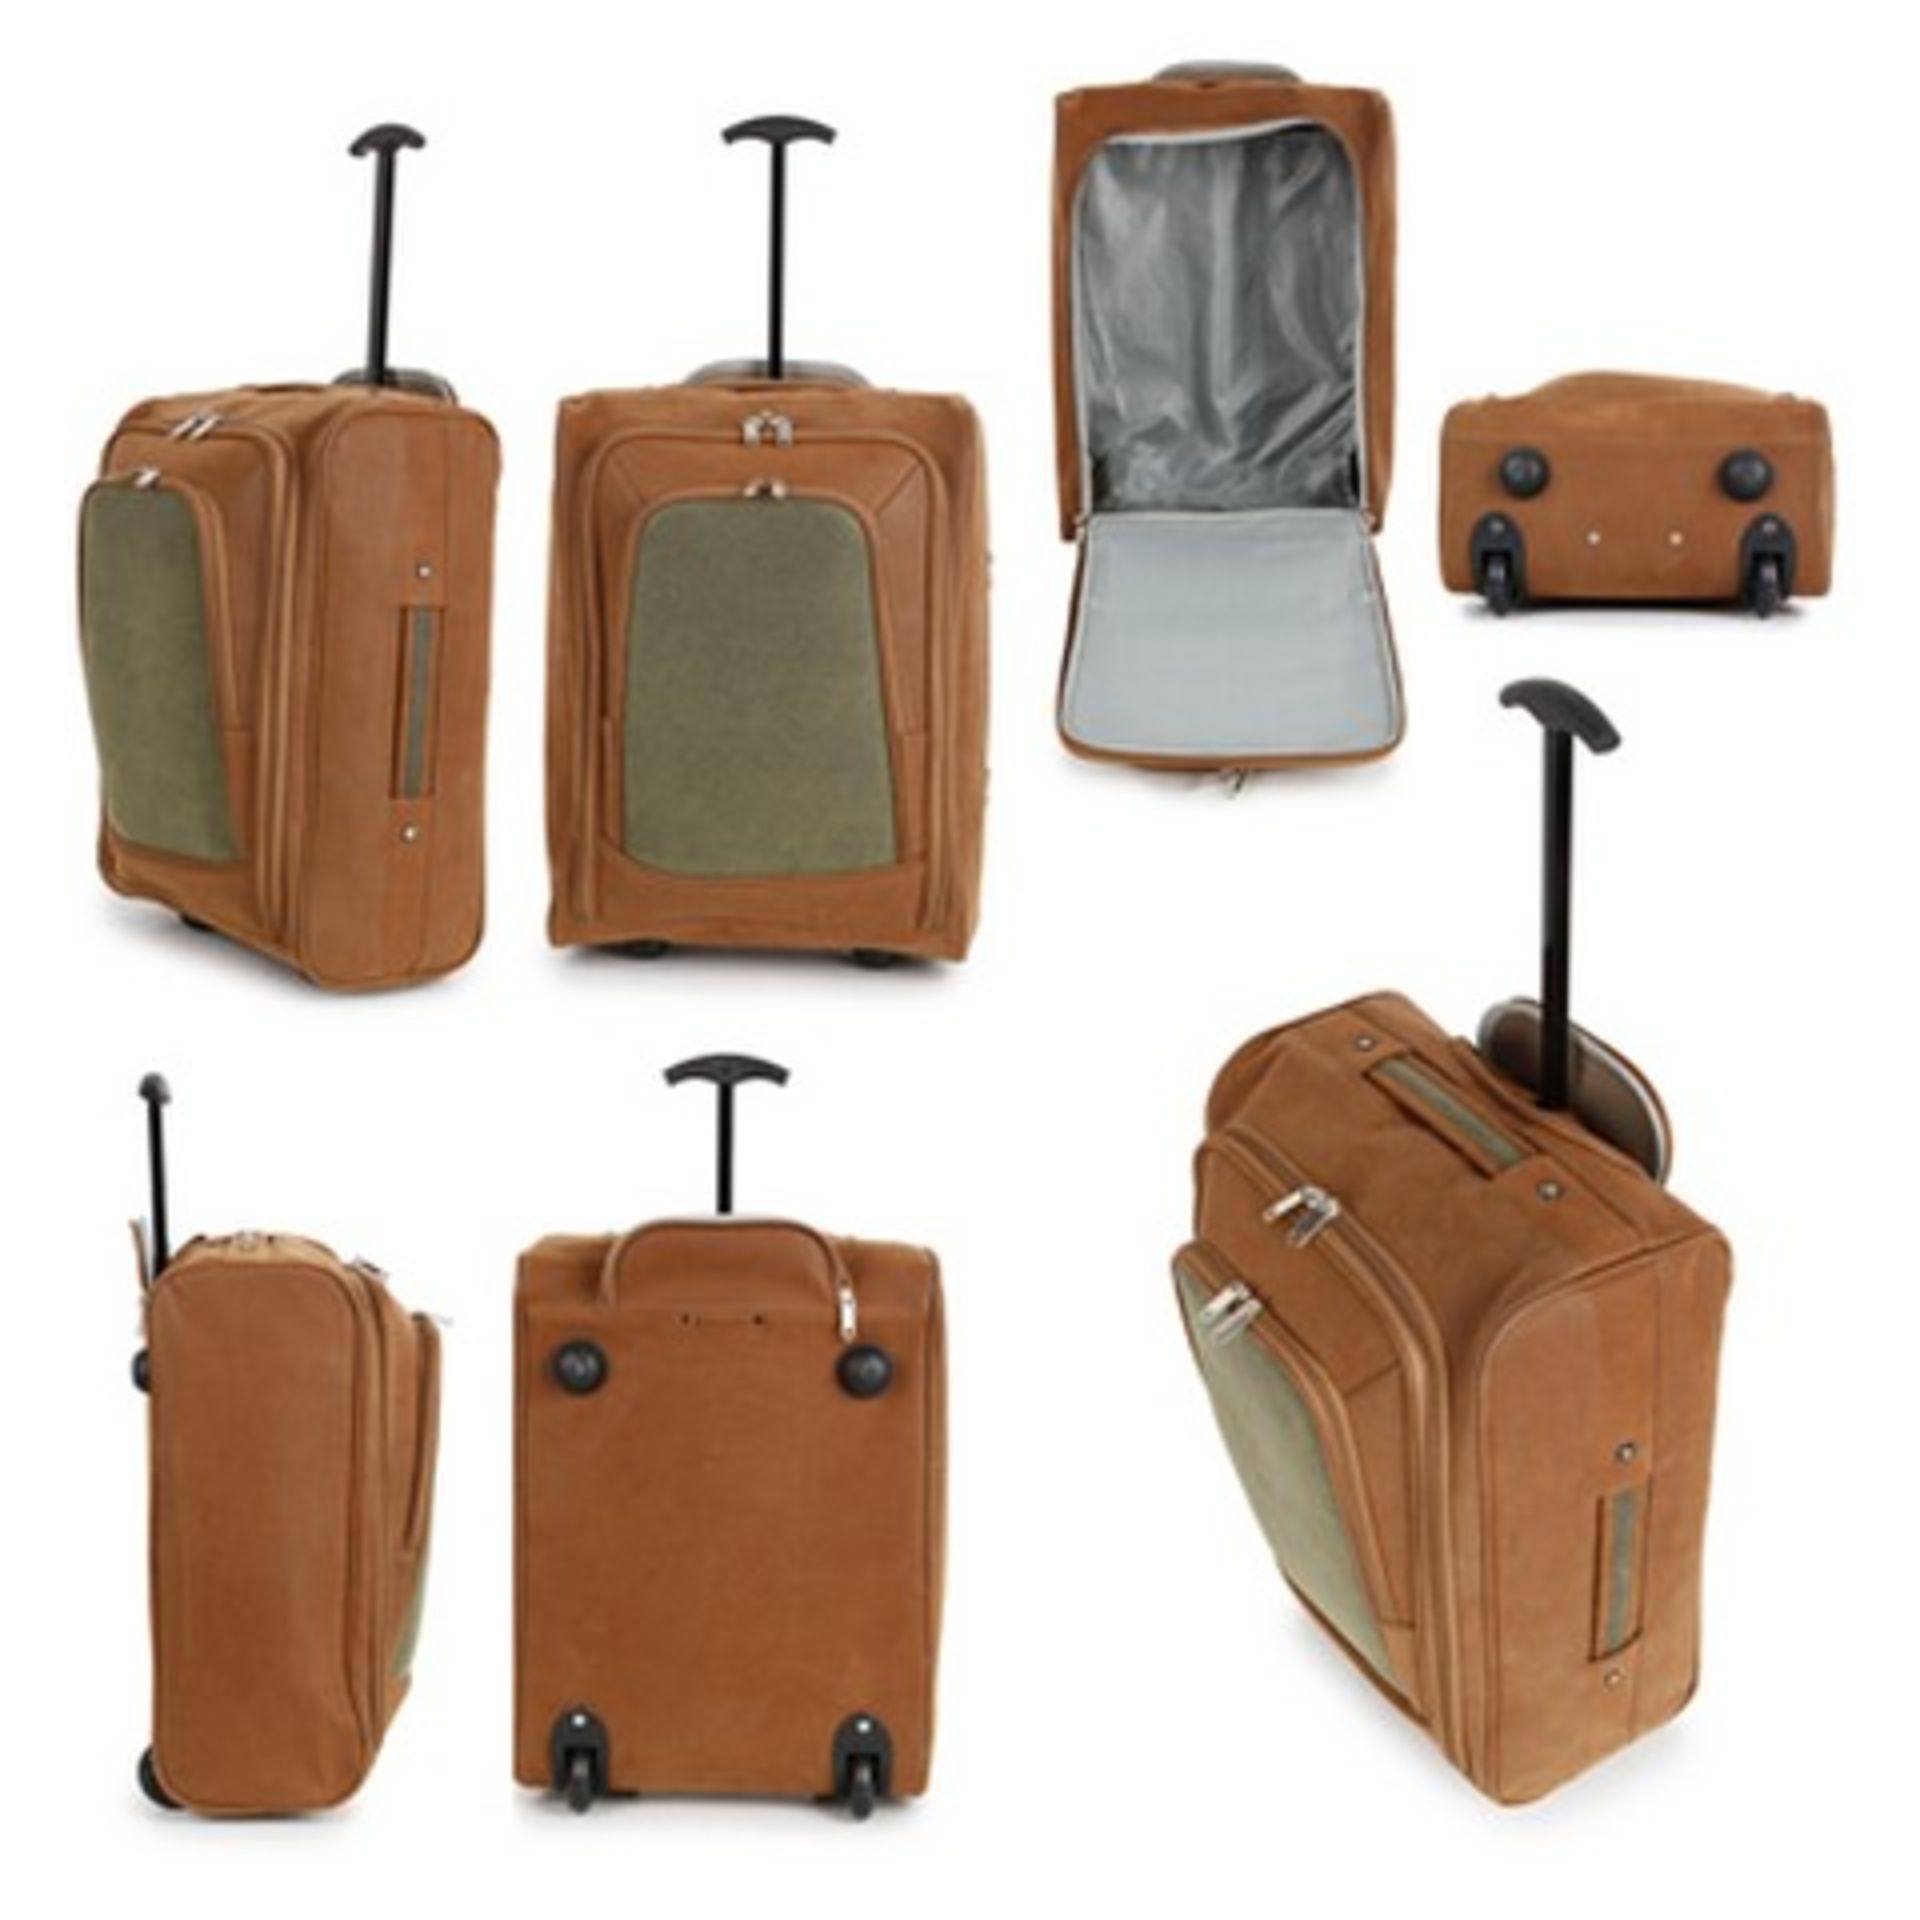 V Brand New Cabinclass Trolley Suitcase - ISP £59.99 (Snazzy Luggage) - Hand Luggage Size (